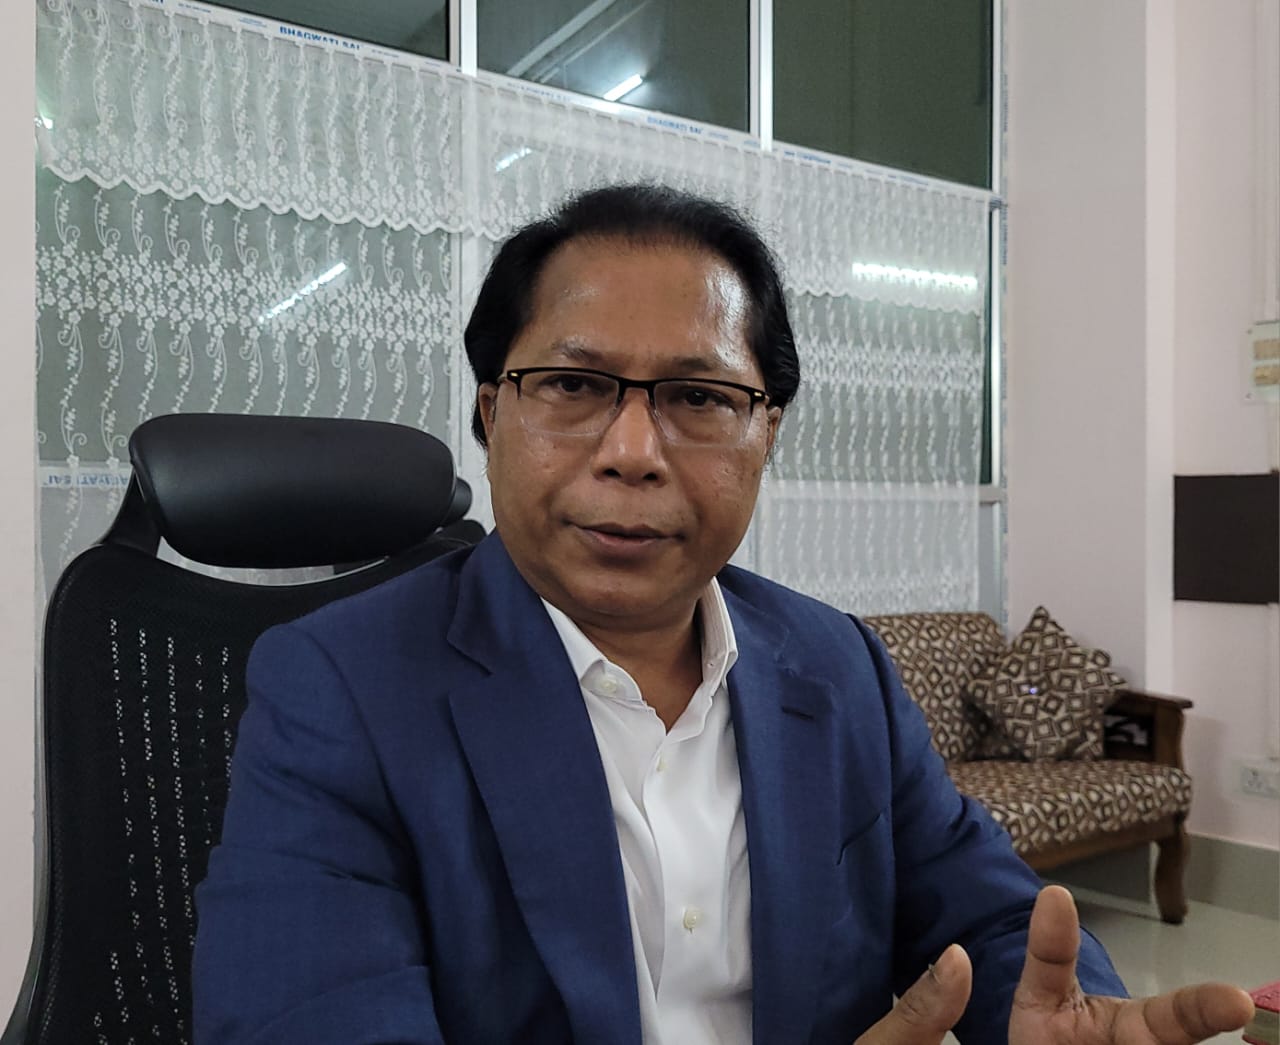 Meghalaya BJP President welcomes Dr. Mukul Sangma to join the party